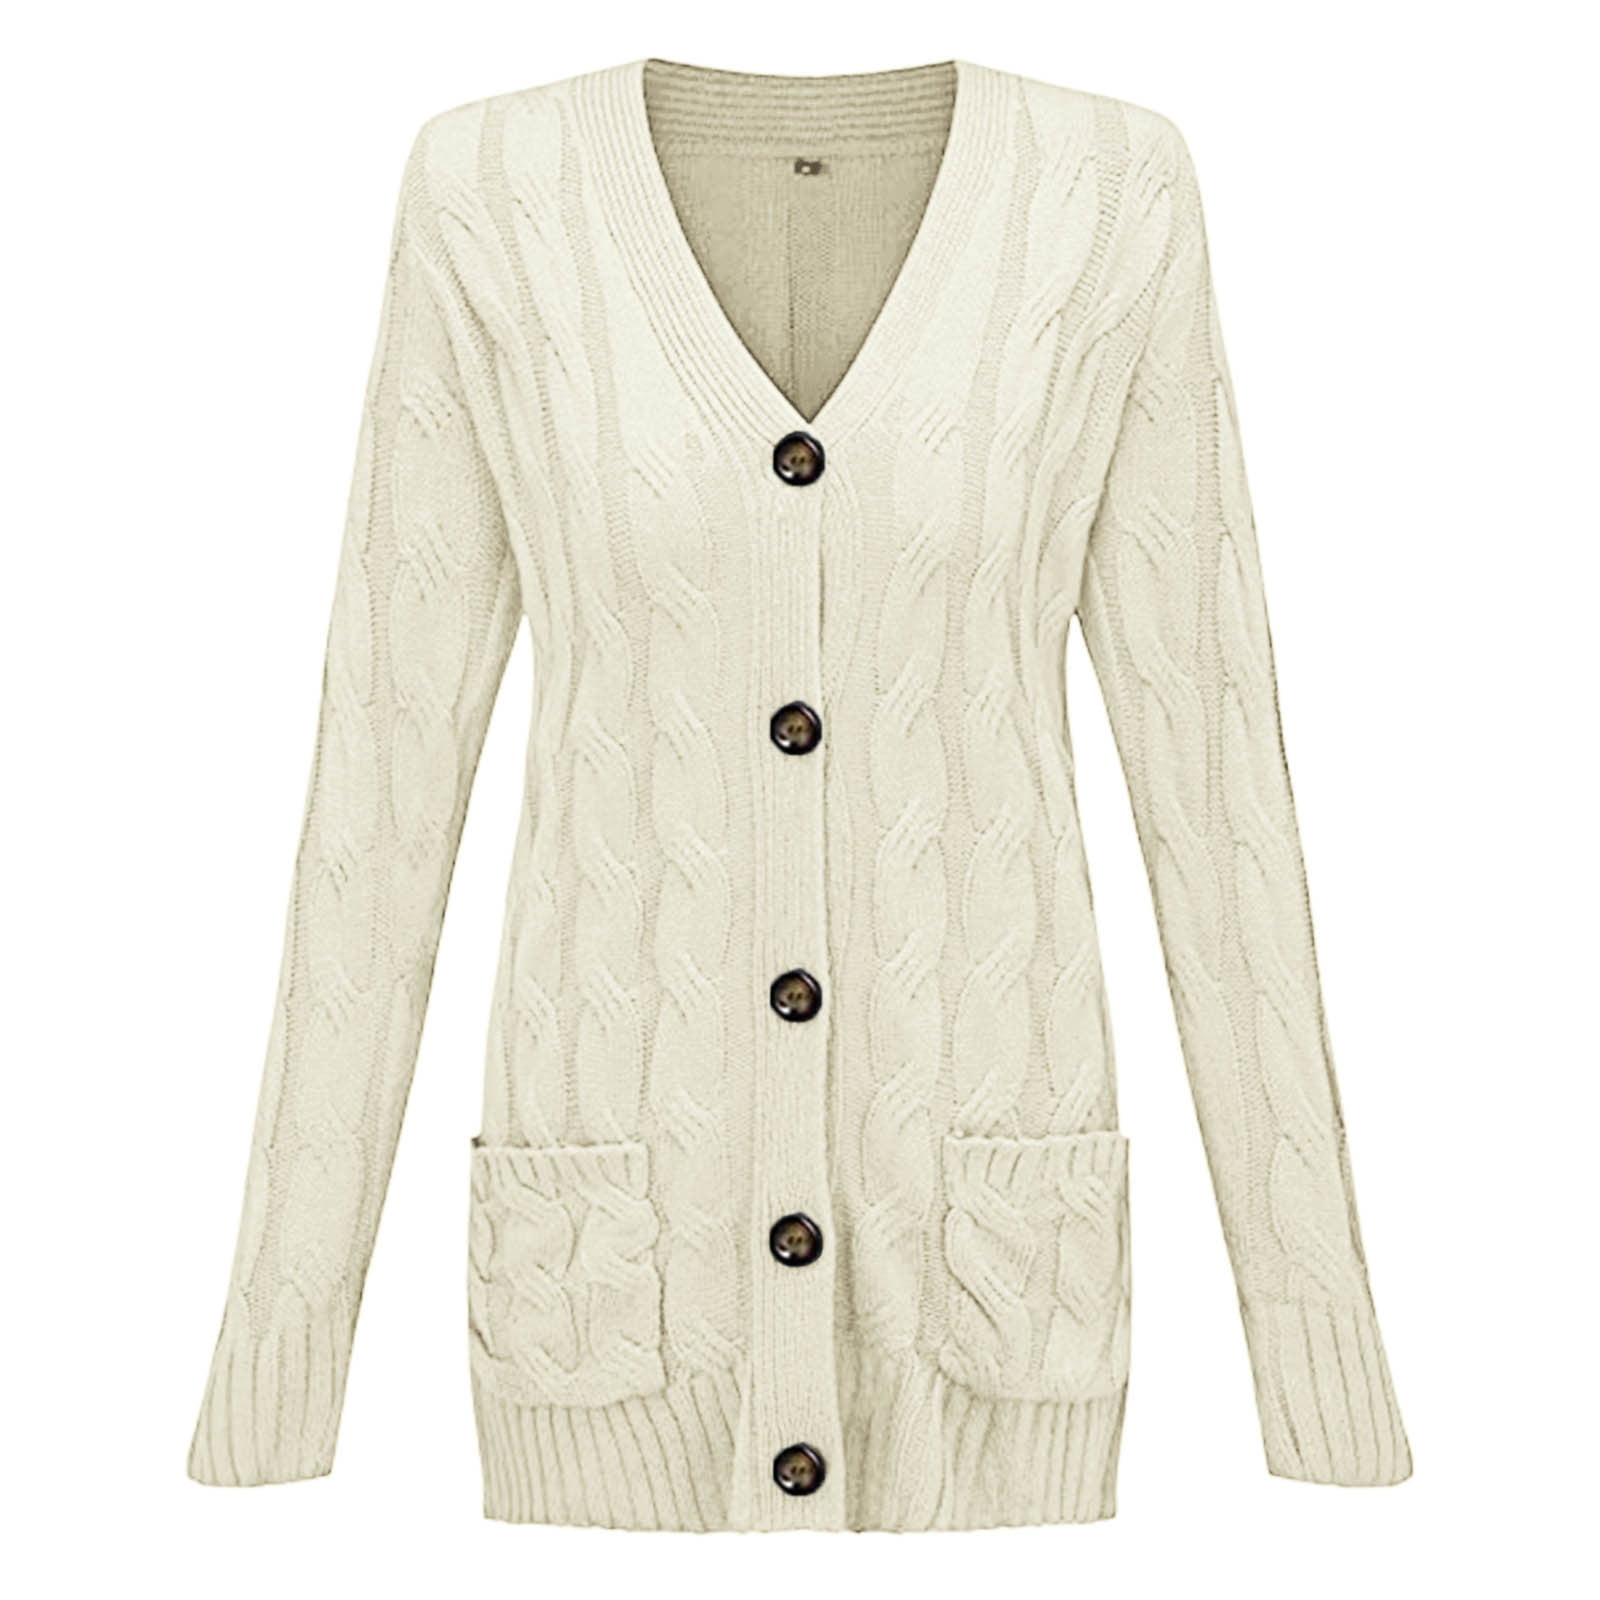 Womens Button up Cardigan Sweaters plus Size Cardigans for Women